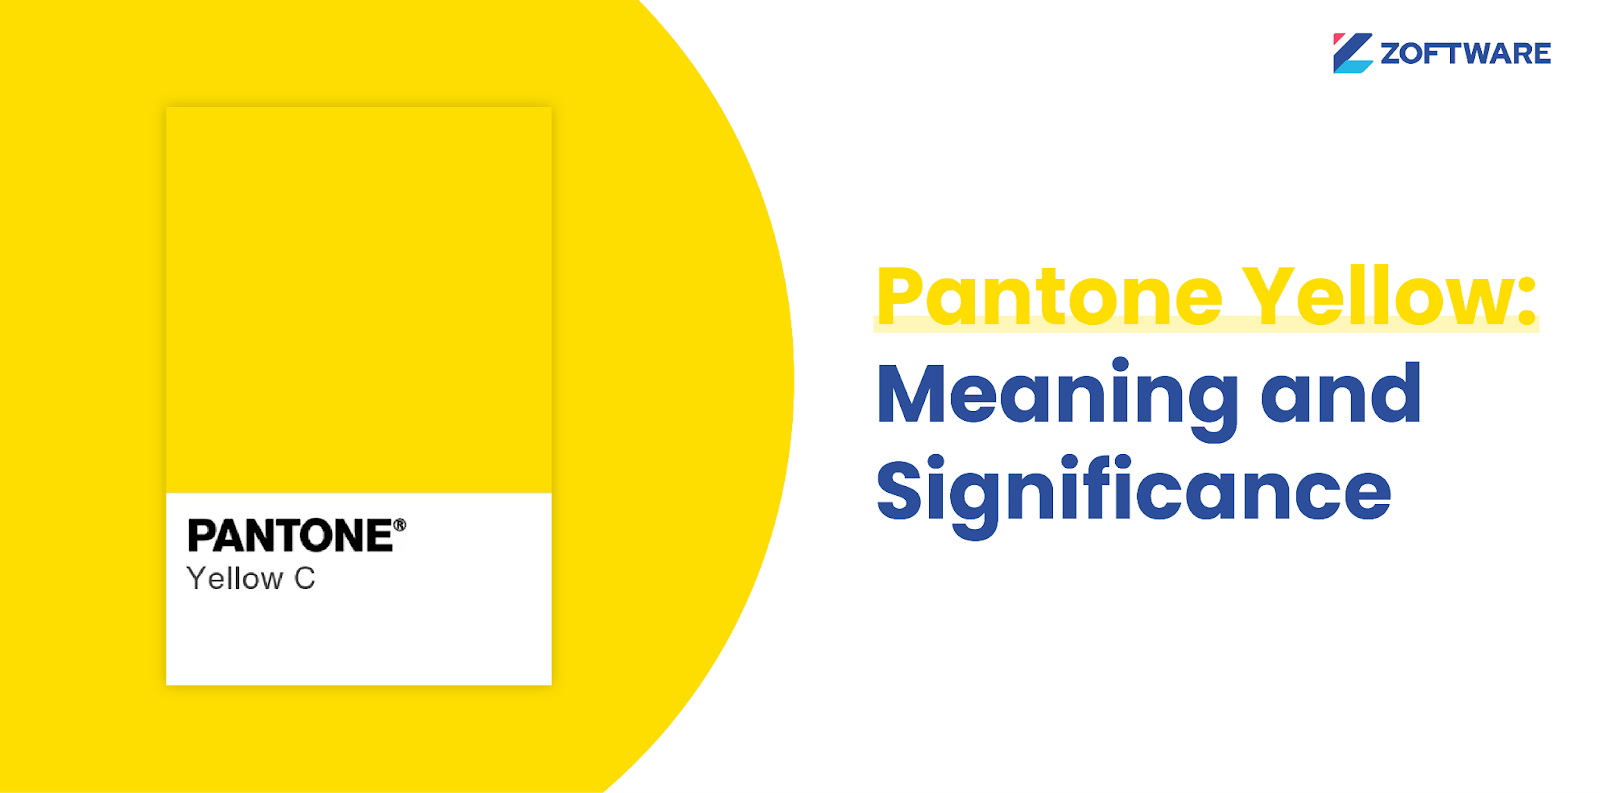 Pantone Yellow: Meaning and Significance